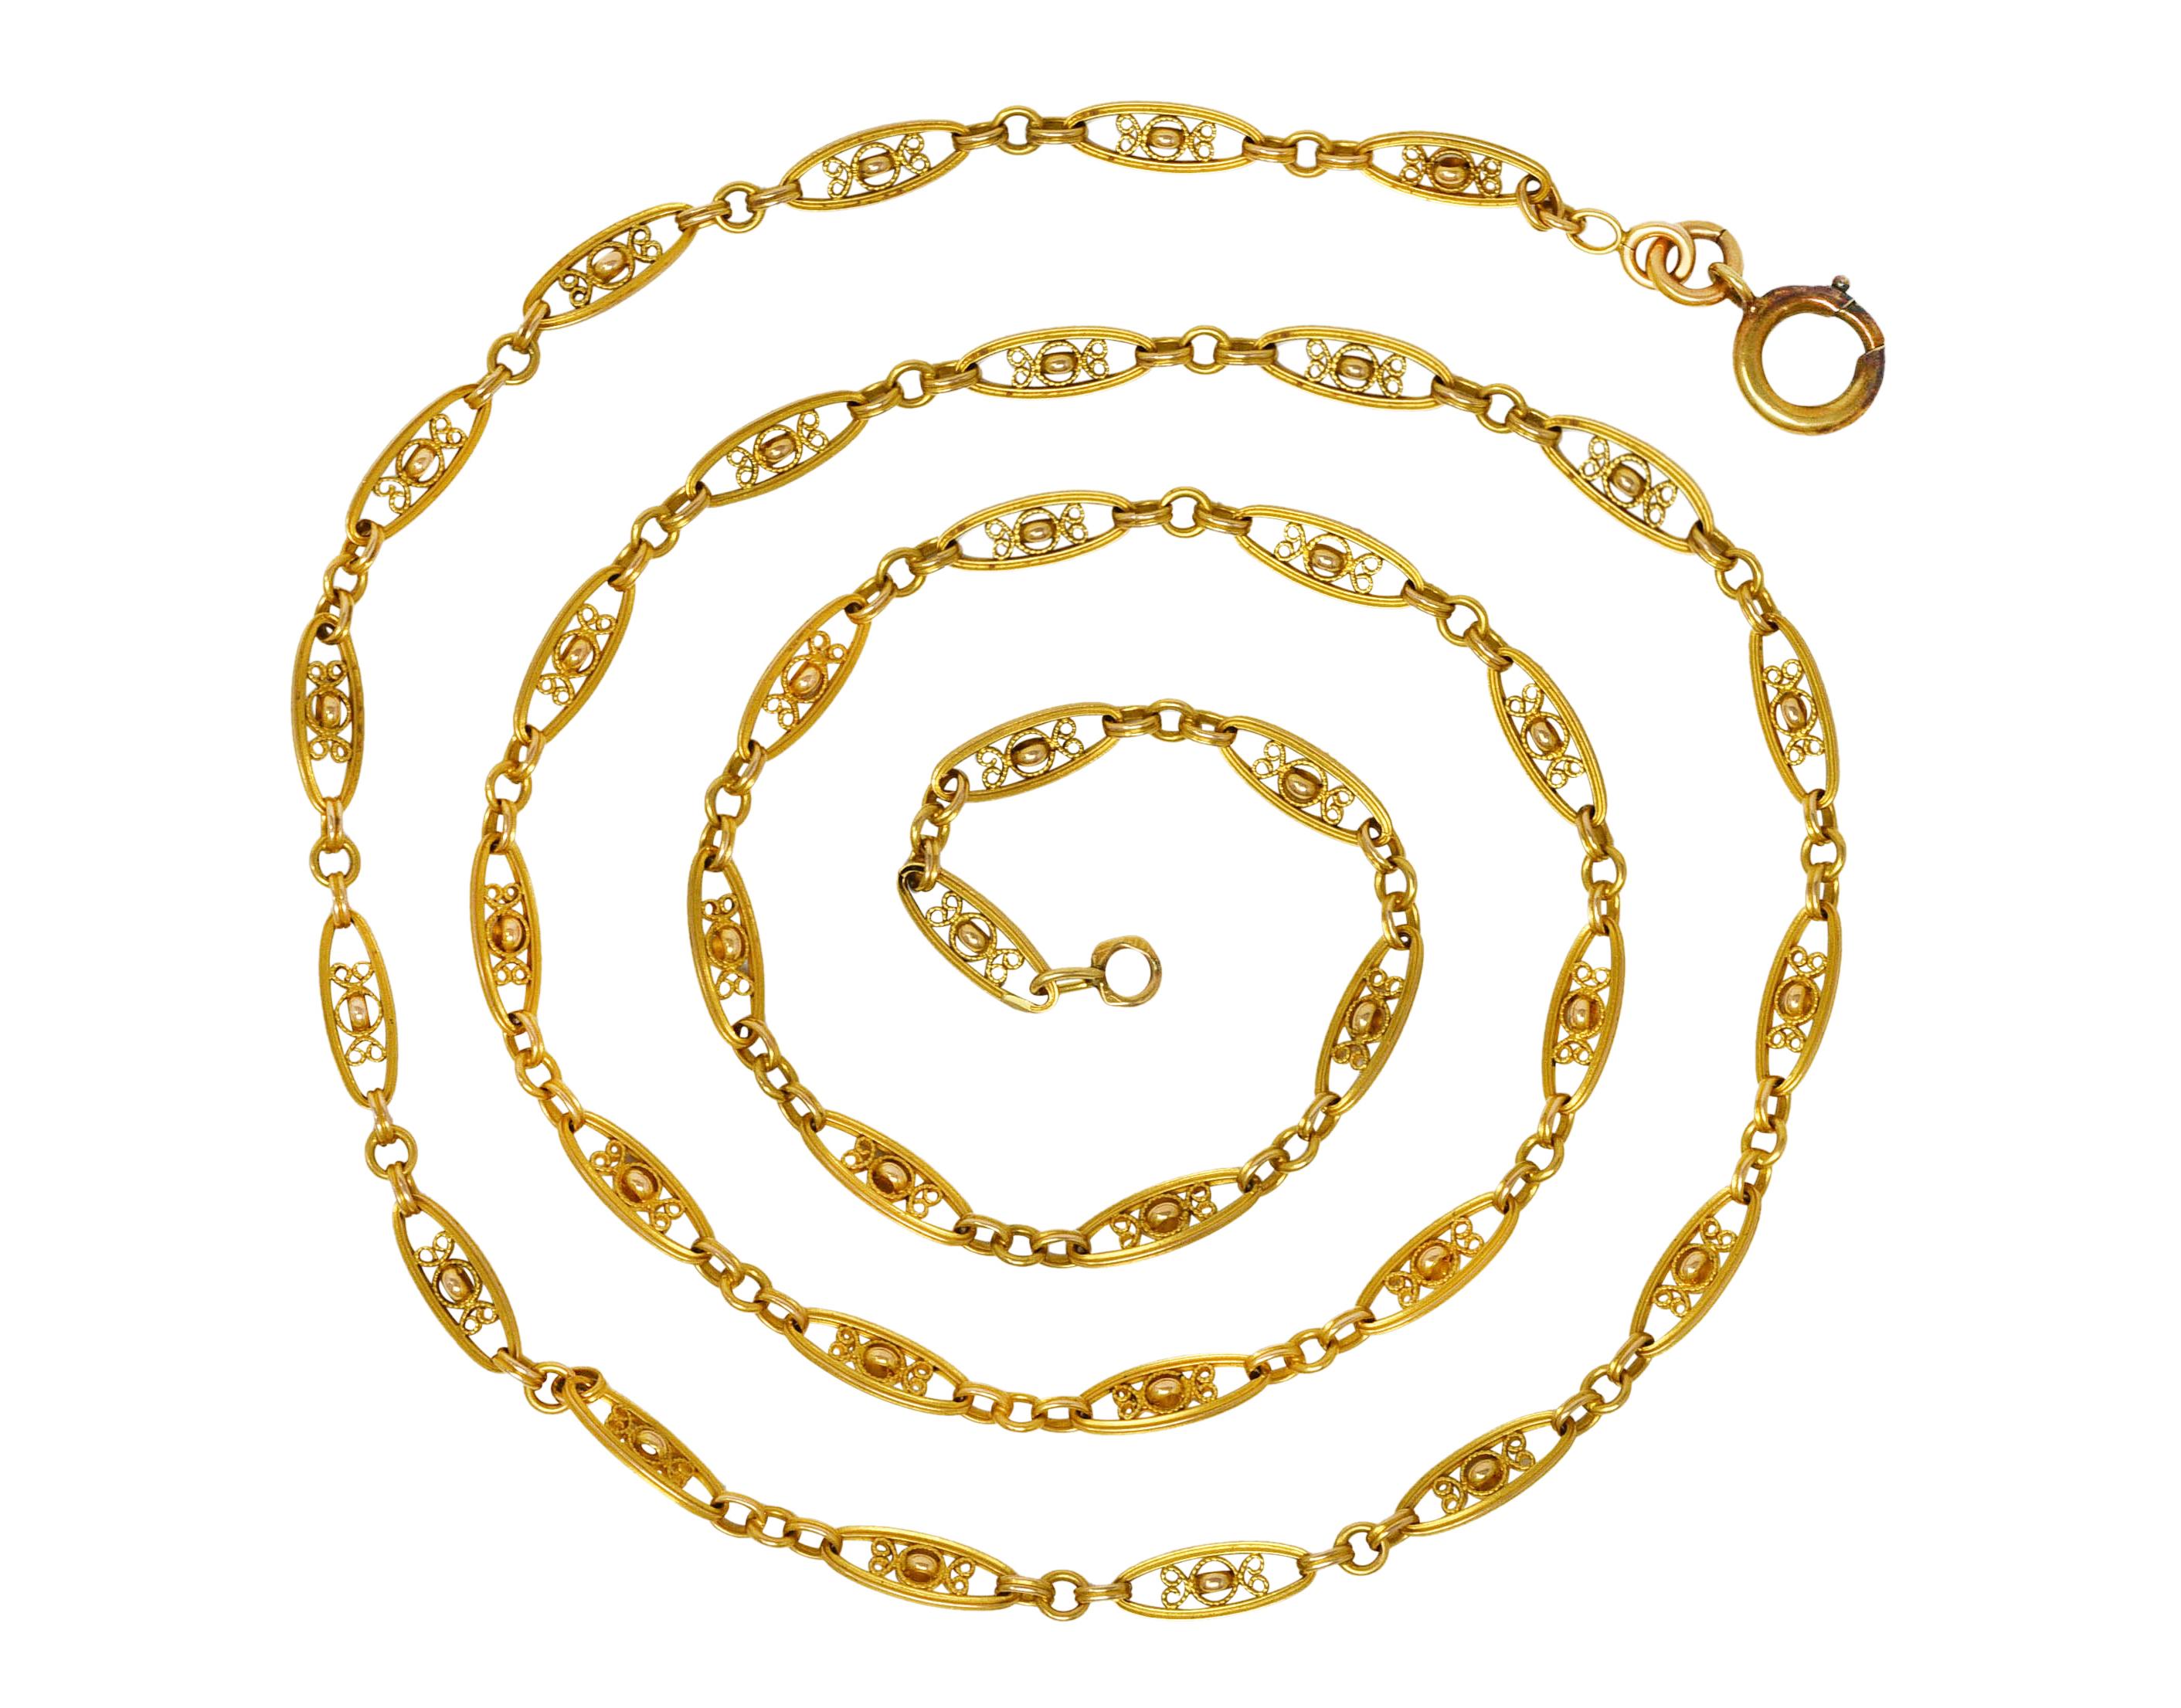 Chain is comprised of navette shaped links centering gold rings with curling filigree surround. Alternating with ridged oval and round links. Completed by spring clasp closure. Tested with French assay marks for 18 karat gold. With maker's mark.